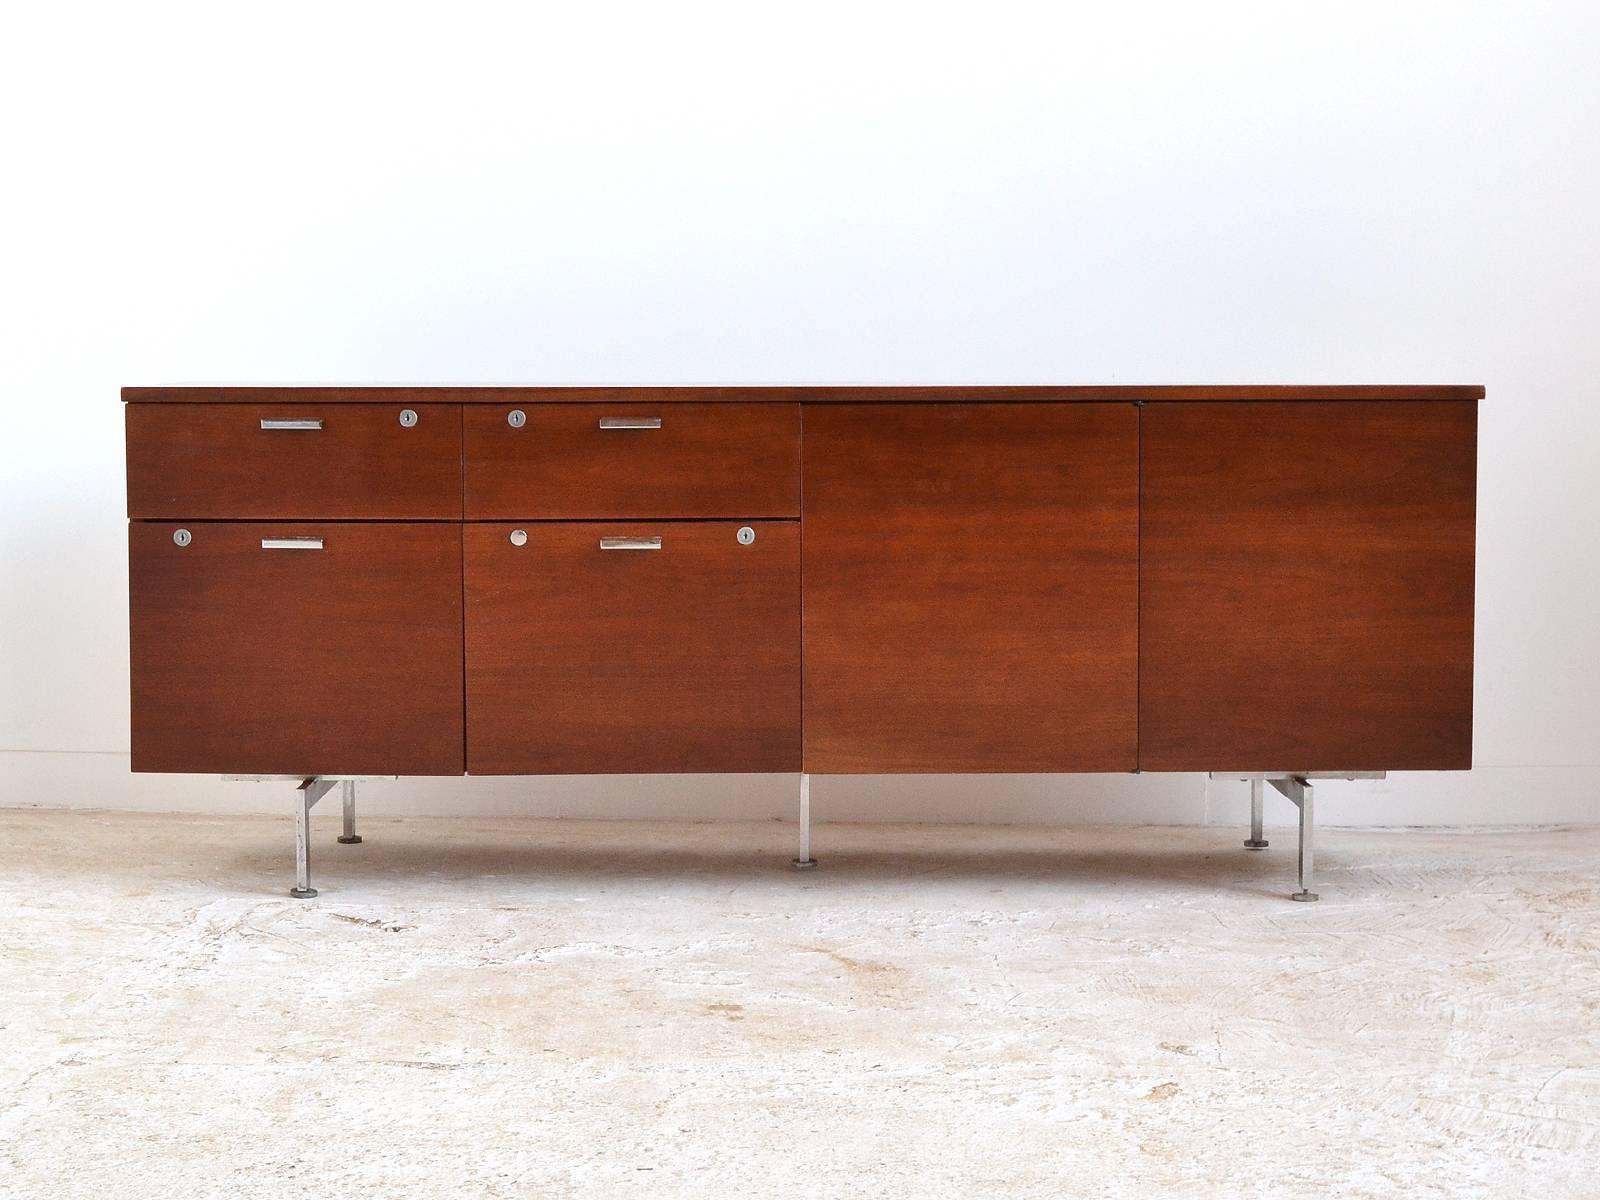 This handsome credenza by Robert John features a walnut case supported by chromed steel legs that remind us of designs by Hans Wegner. It has two shallow drawers above two deep drawers and two open cabinets, one with an adjustable shelf, the other